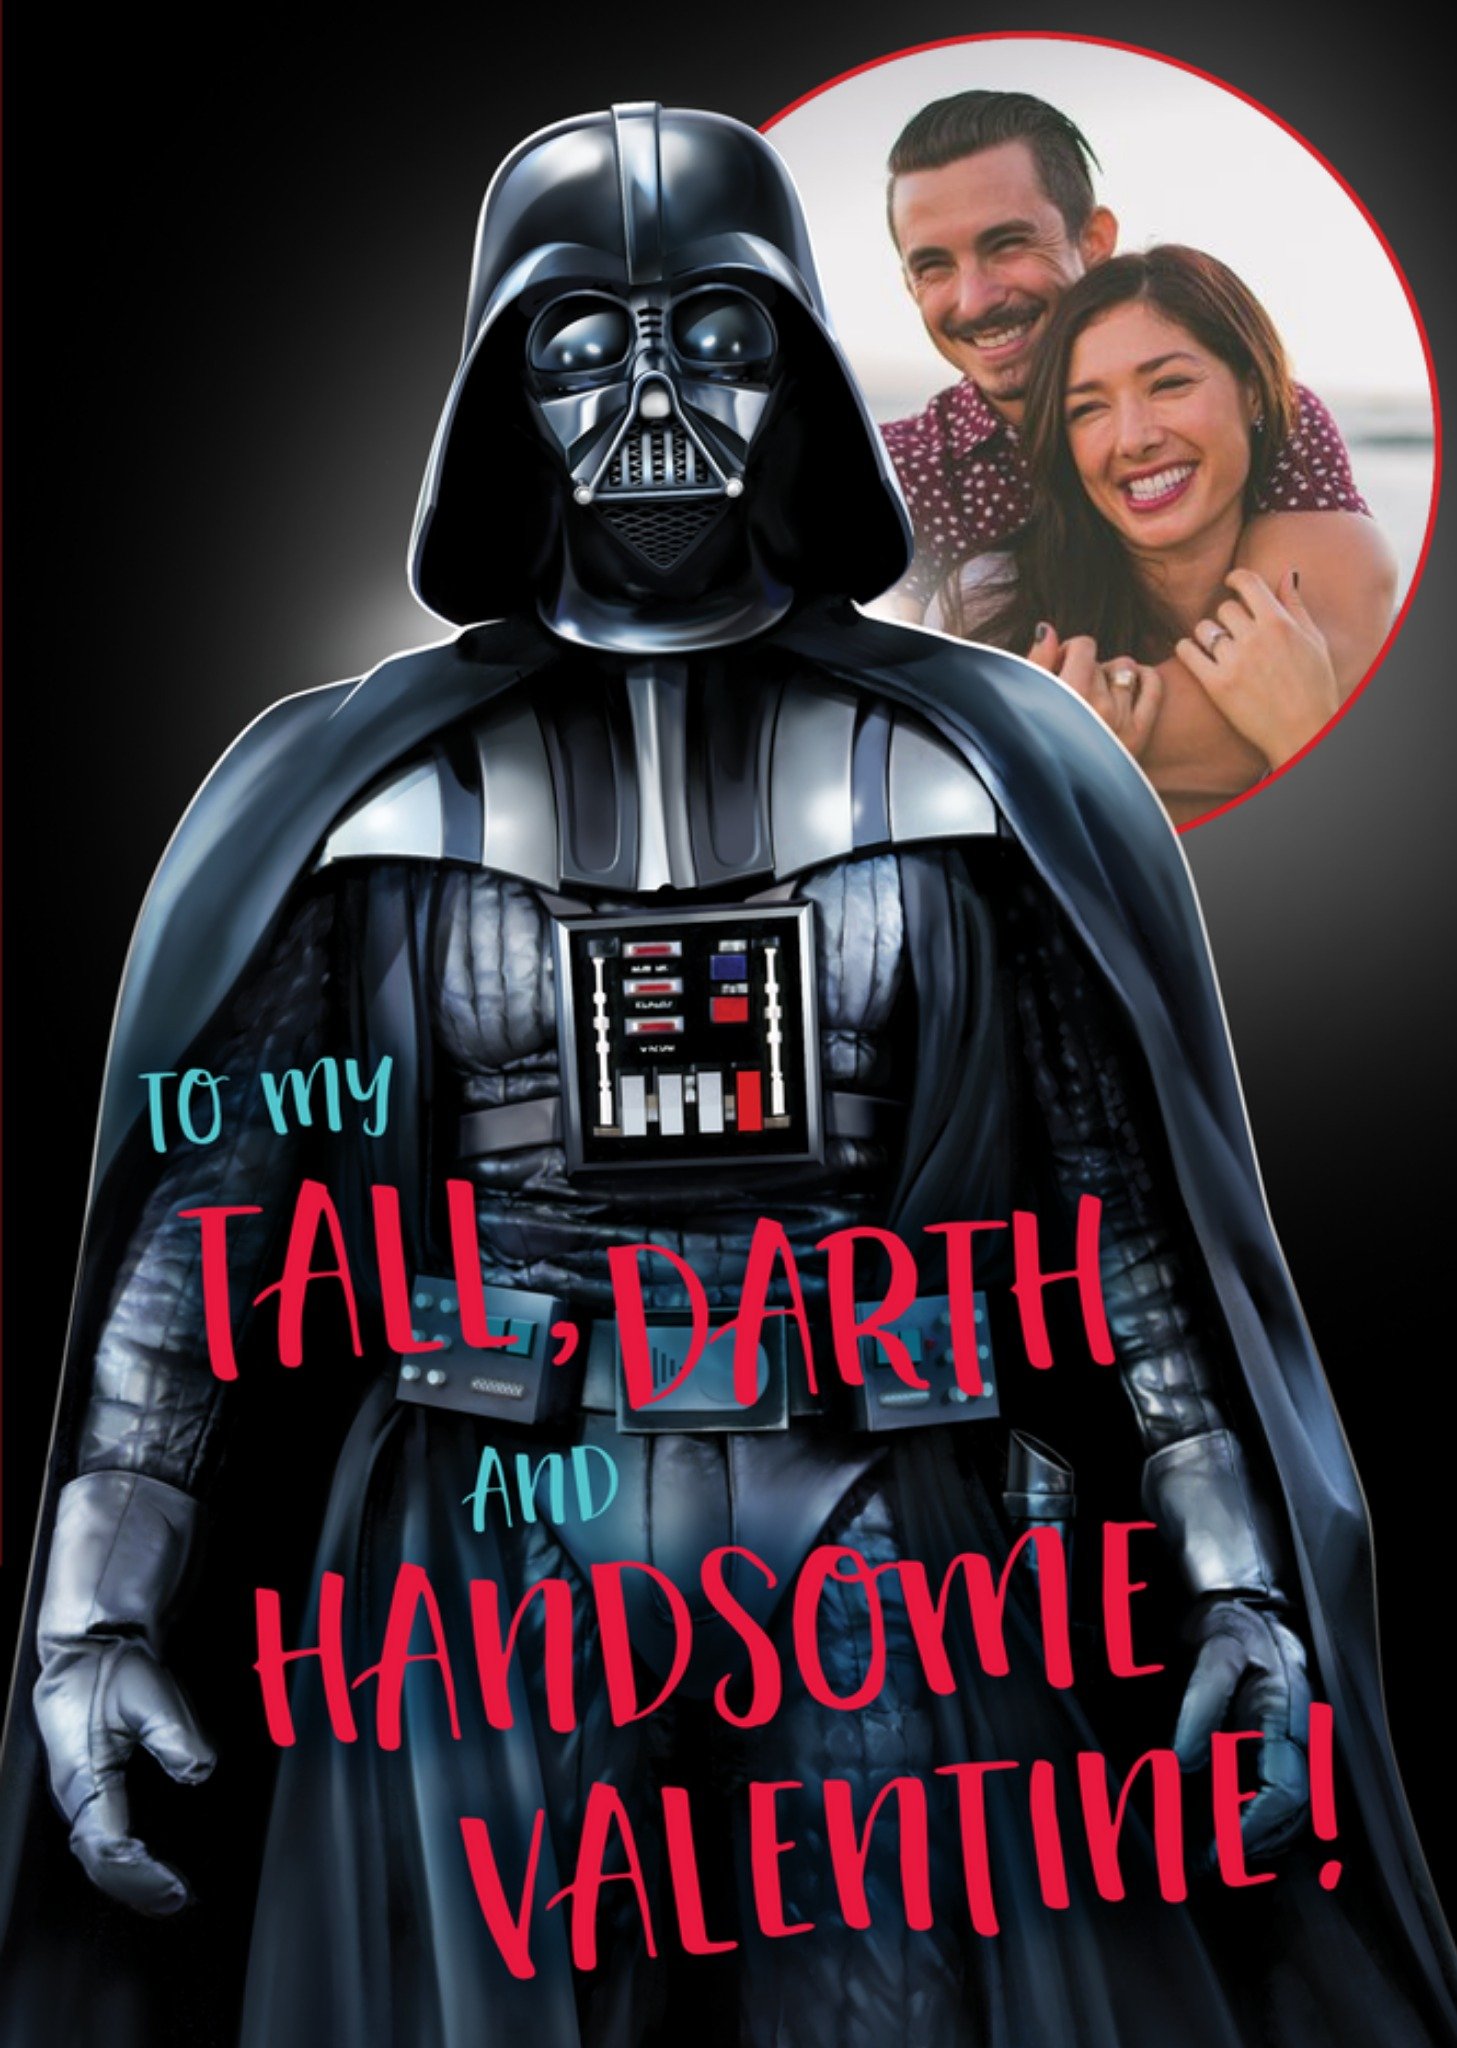 Disney Star Wars To My Tall, Darth, And Handsome Valentines Day Photo Card, Large